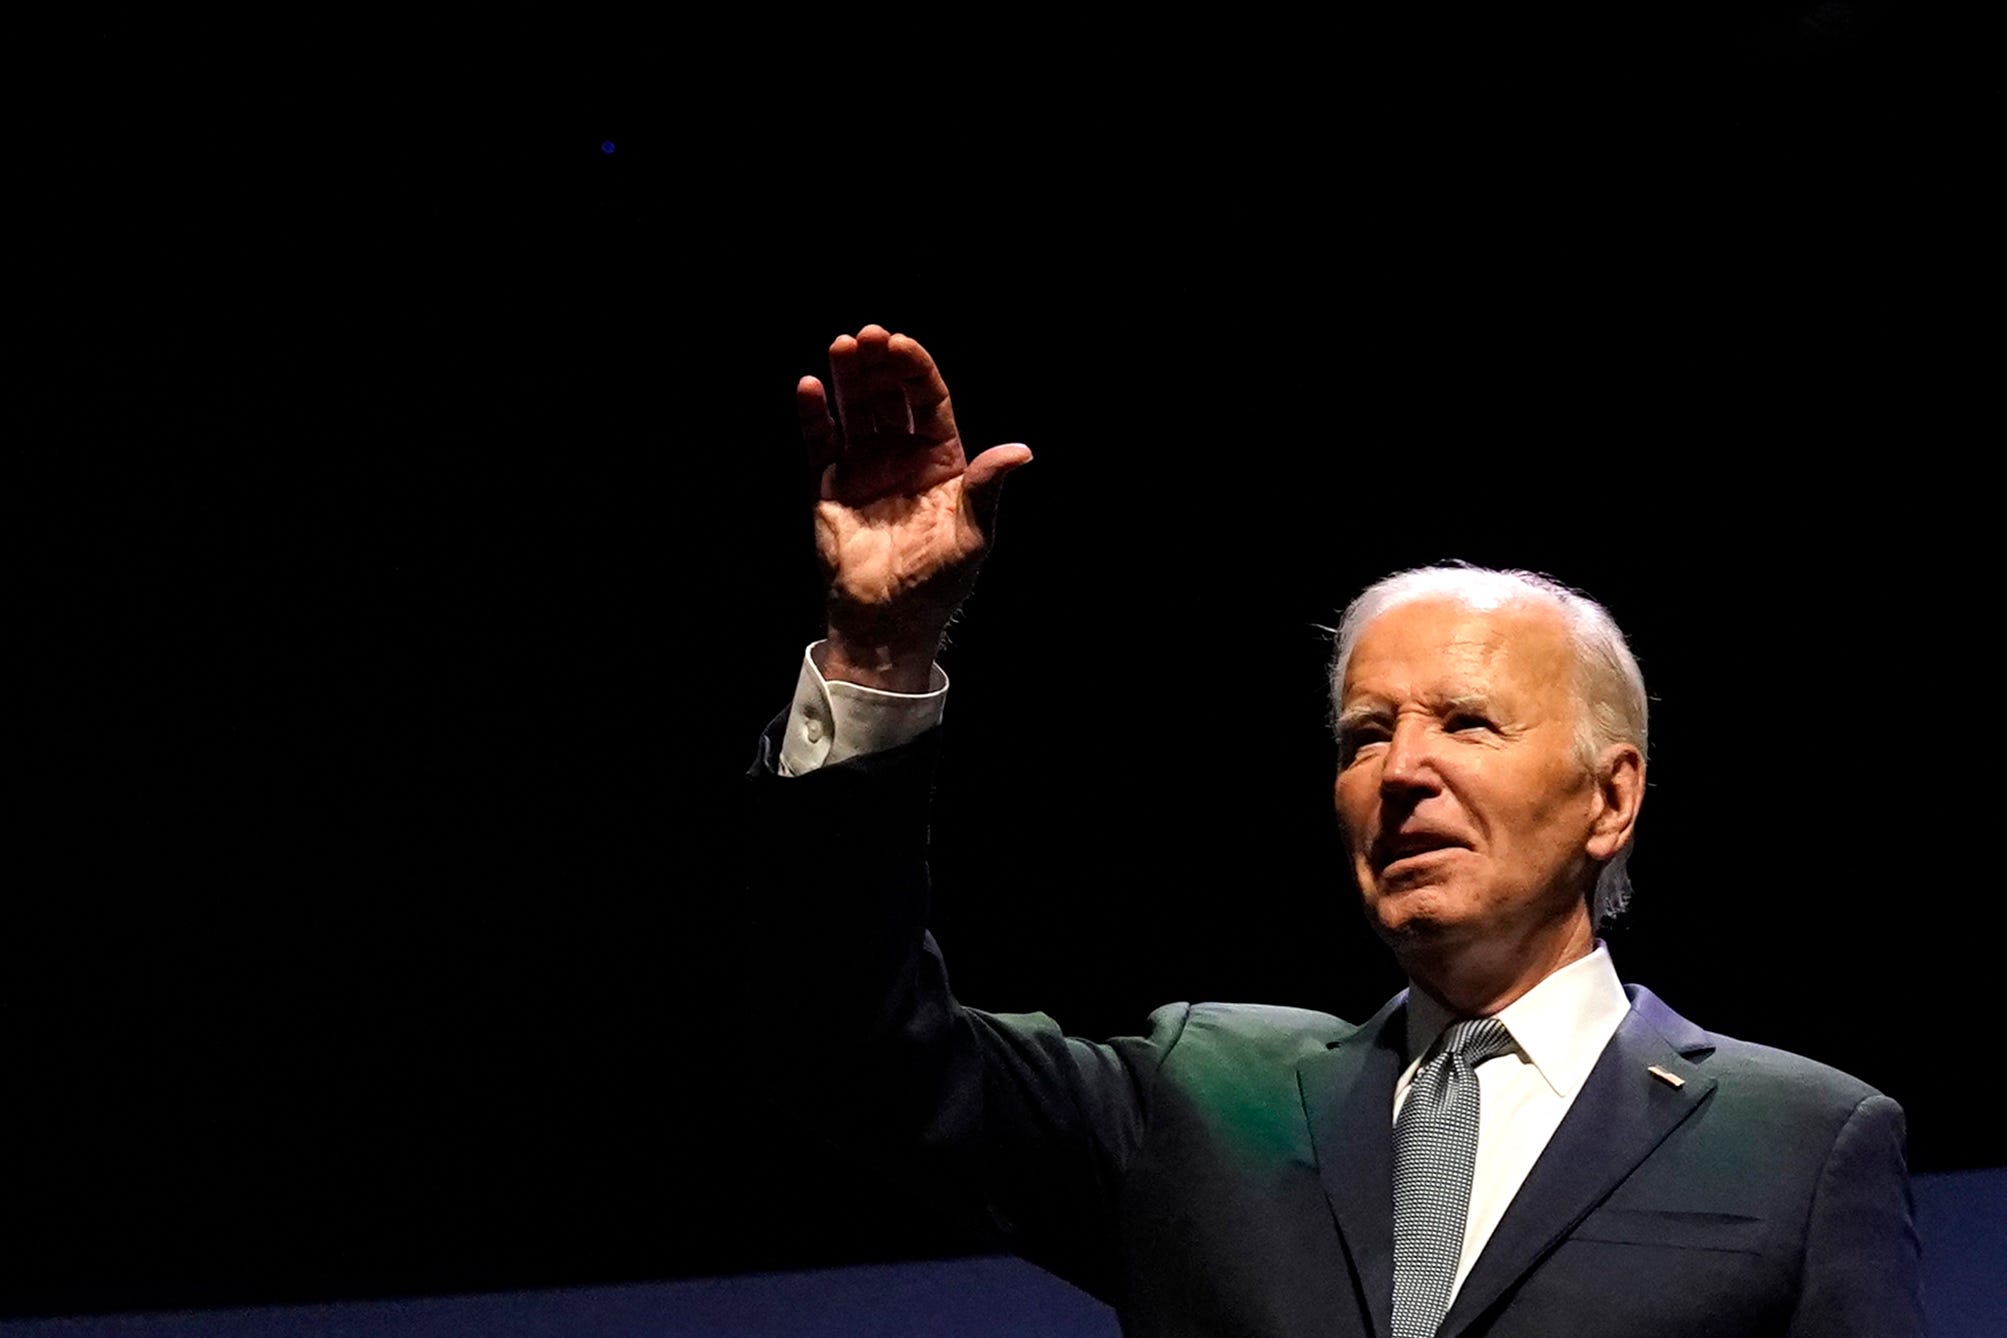 To Biden or not to Biden: North Florida Democrats ignore the elephant in the room